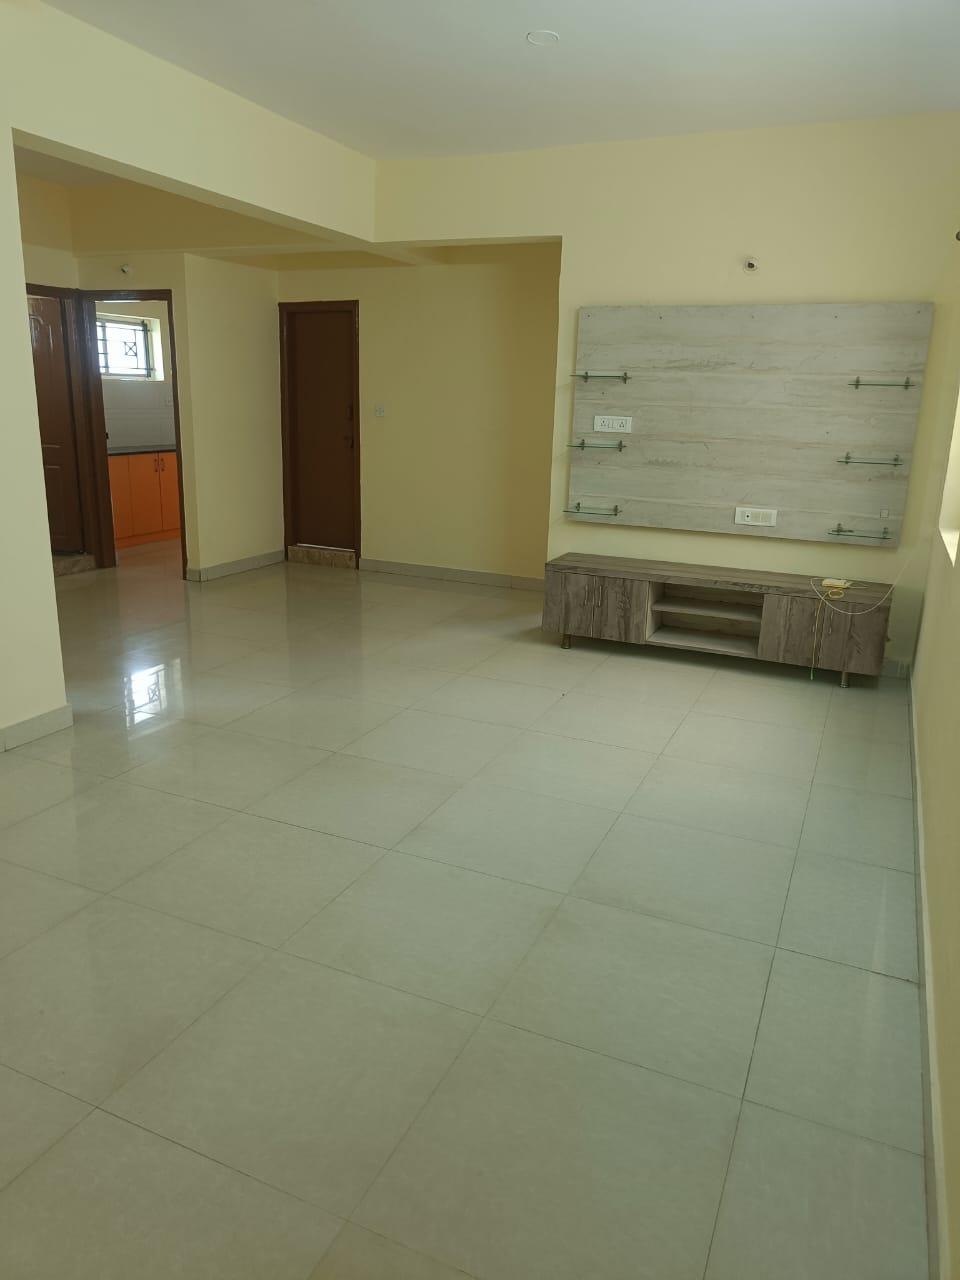 2 BHK Residential Apartment for Lease Only at JAML2 - 3305 in Kadugodi